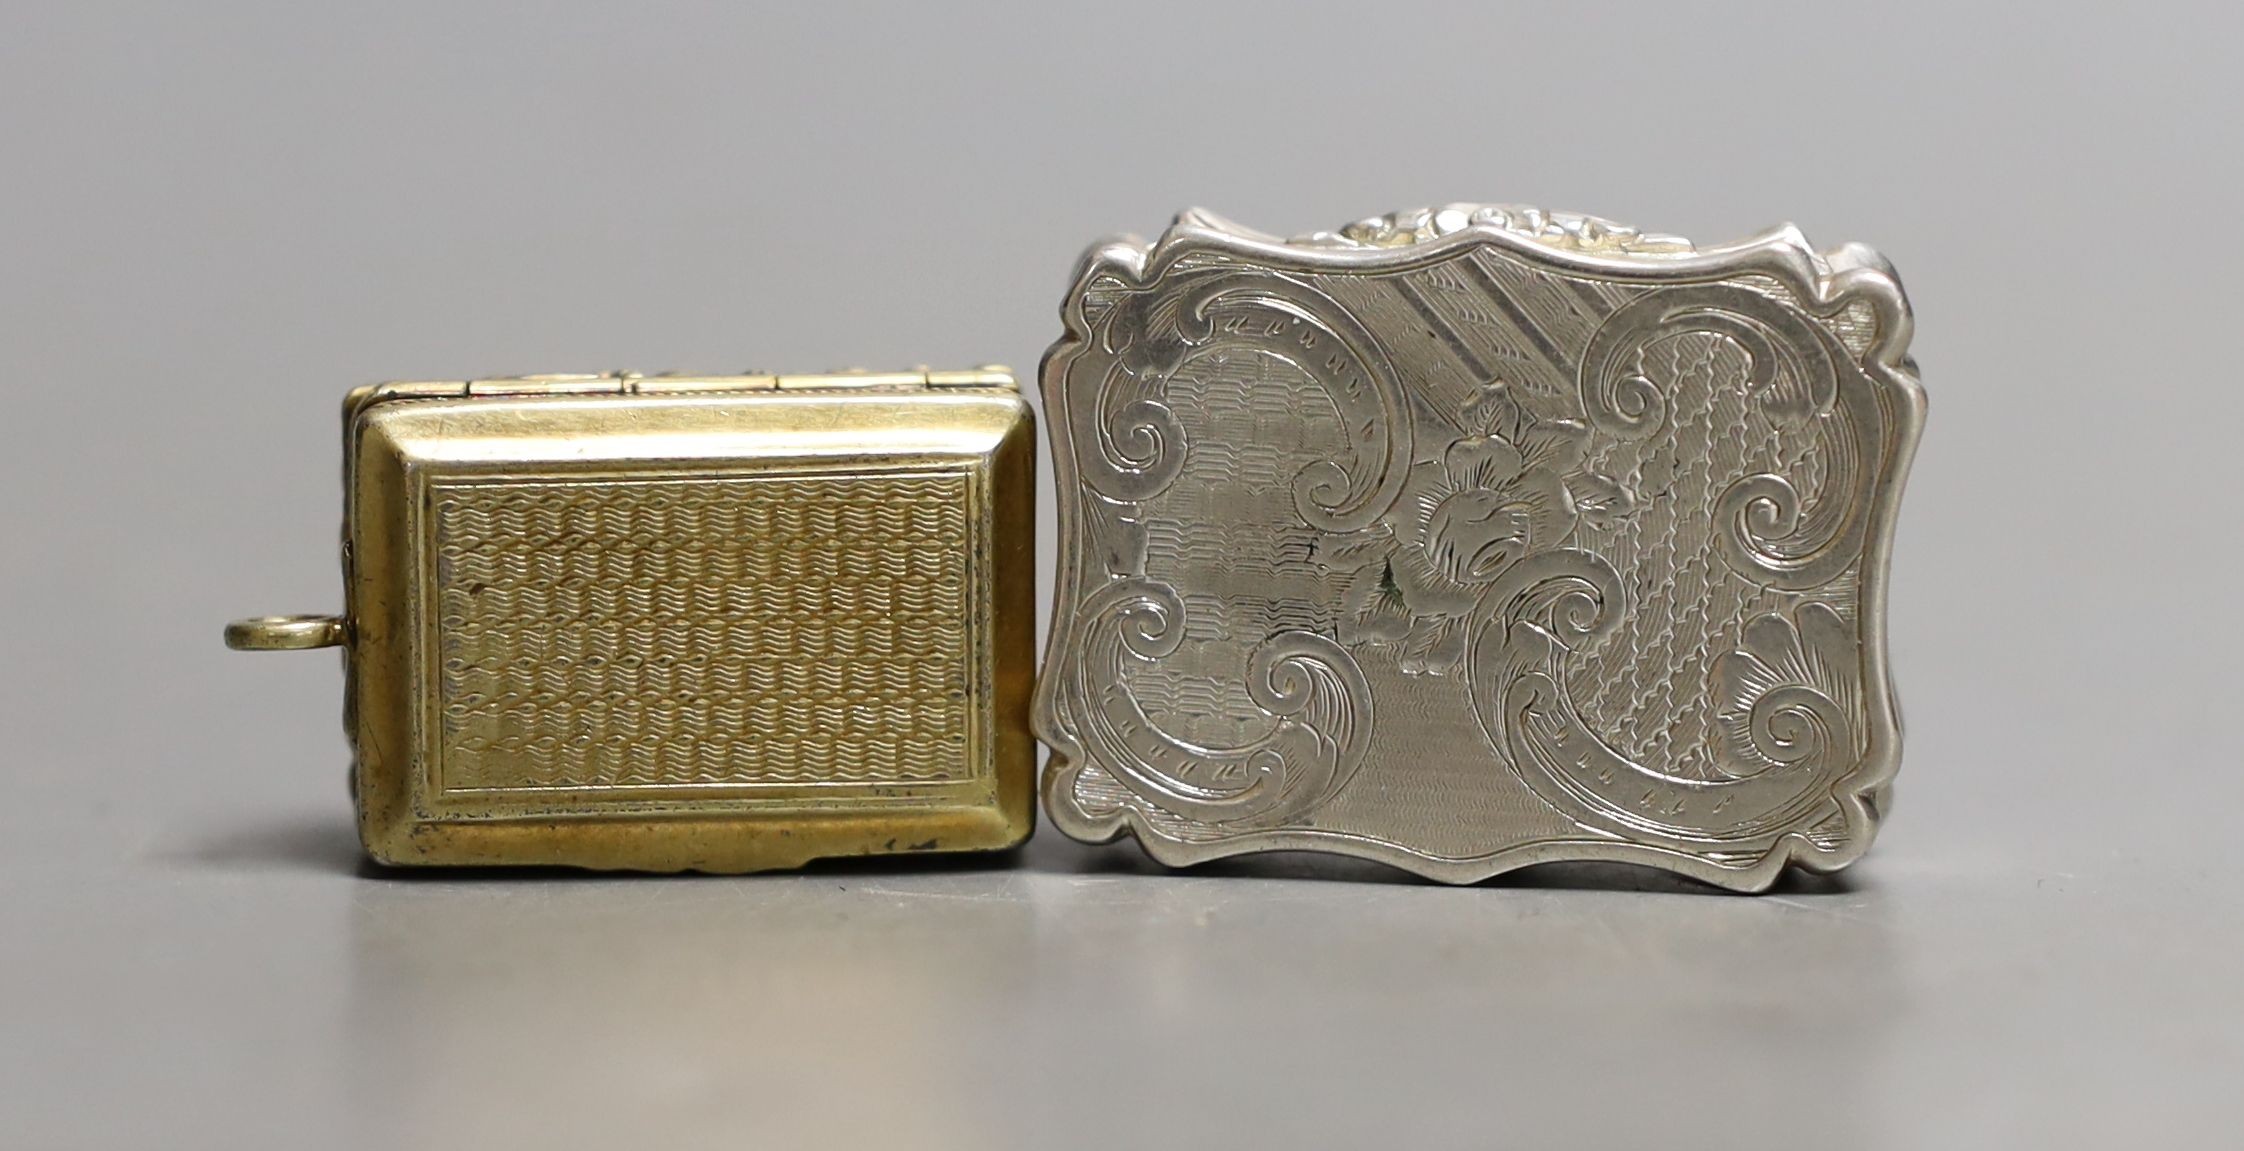 A George IV engine turned silver gilt vinaigrette, by Thomas Parker, Birmingham, with later bale,(date letter illegible), 30mm and a later vinaigrette by Nathaniel Mills, Birmingham, 1846, 36mm.